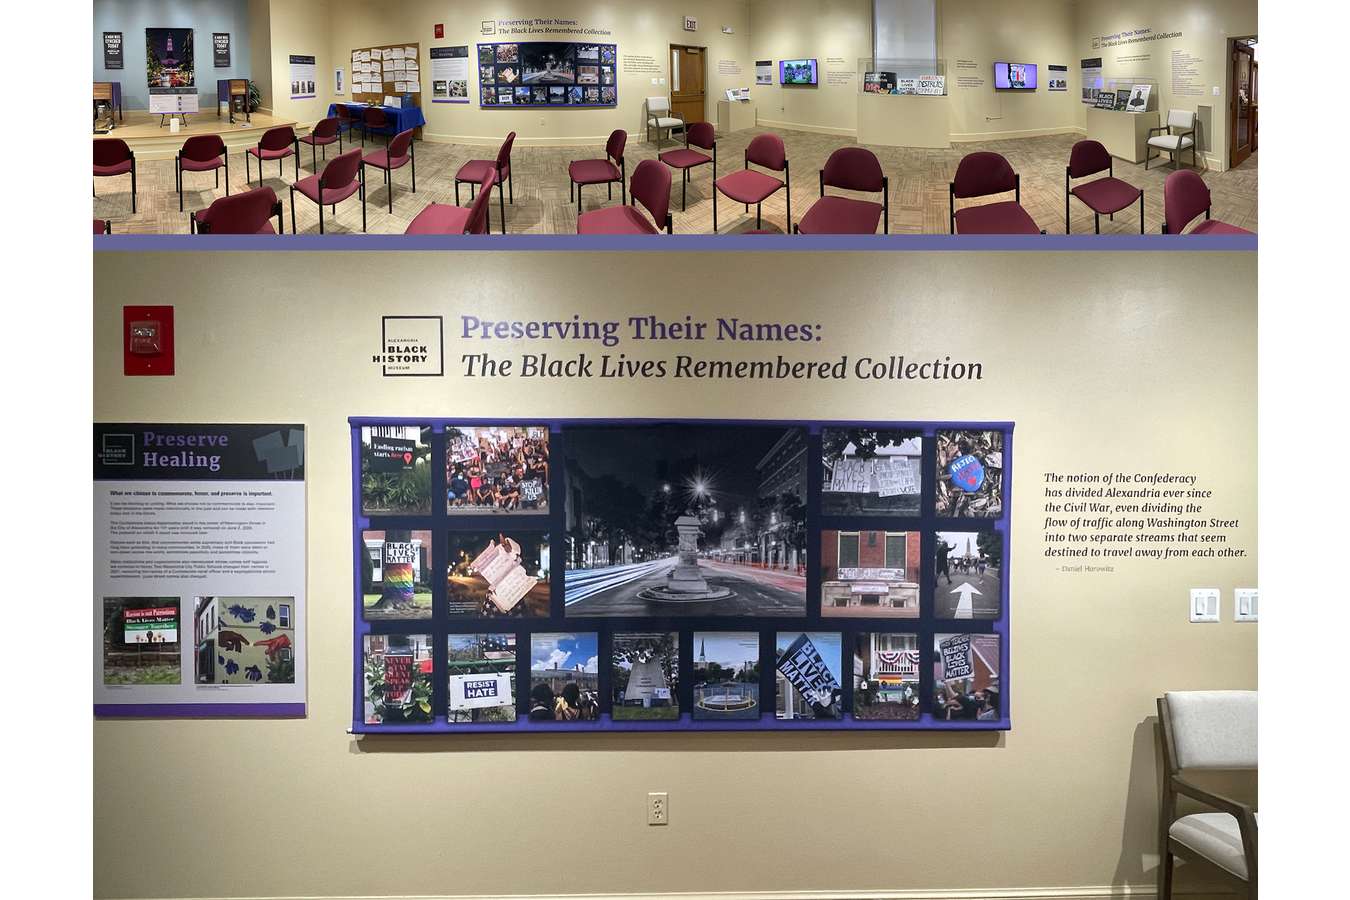 8 Entry Pano : The entry banner, monitors and cases display a variety of the community's collected expressions surrounding the Black Lives Matter movement.